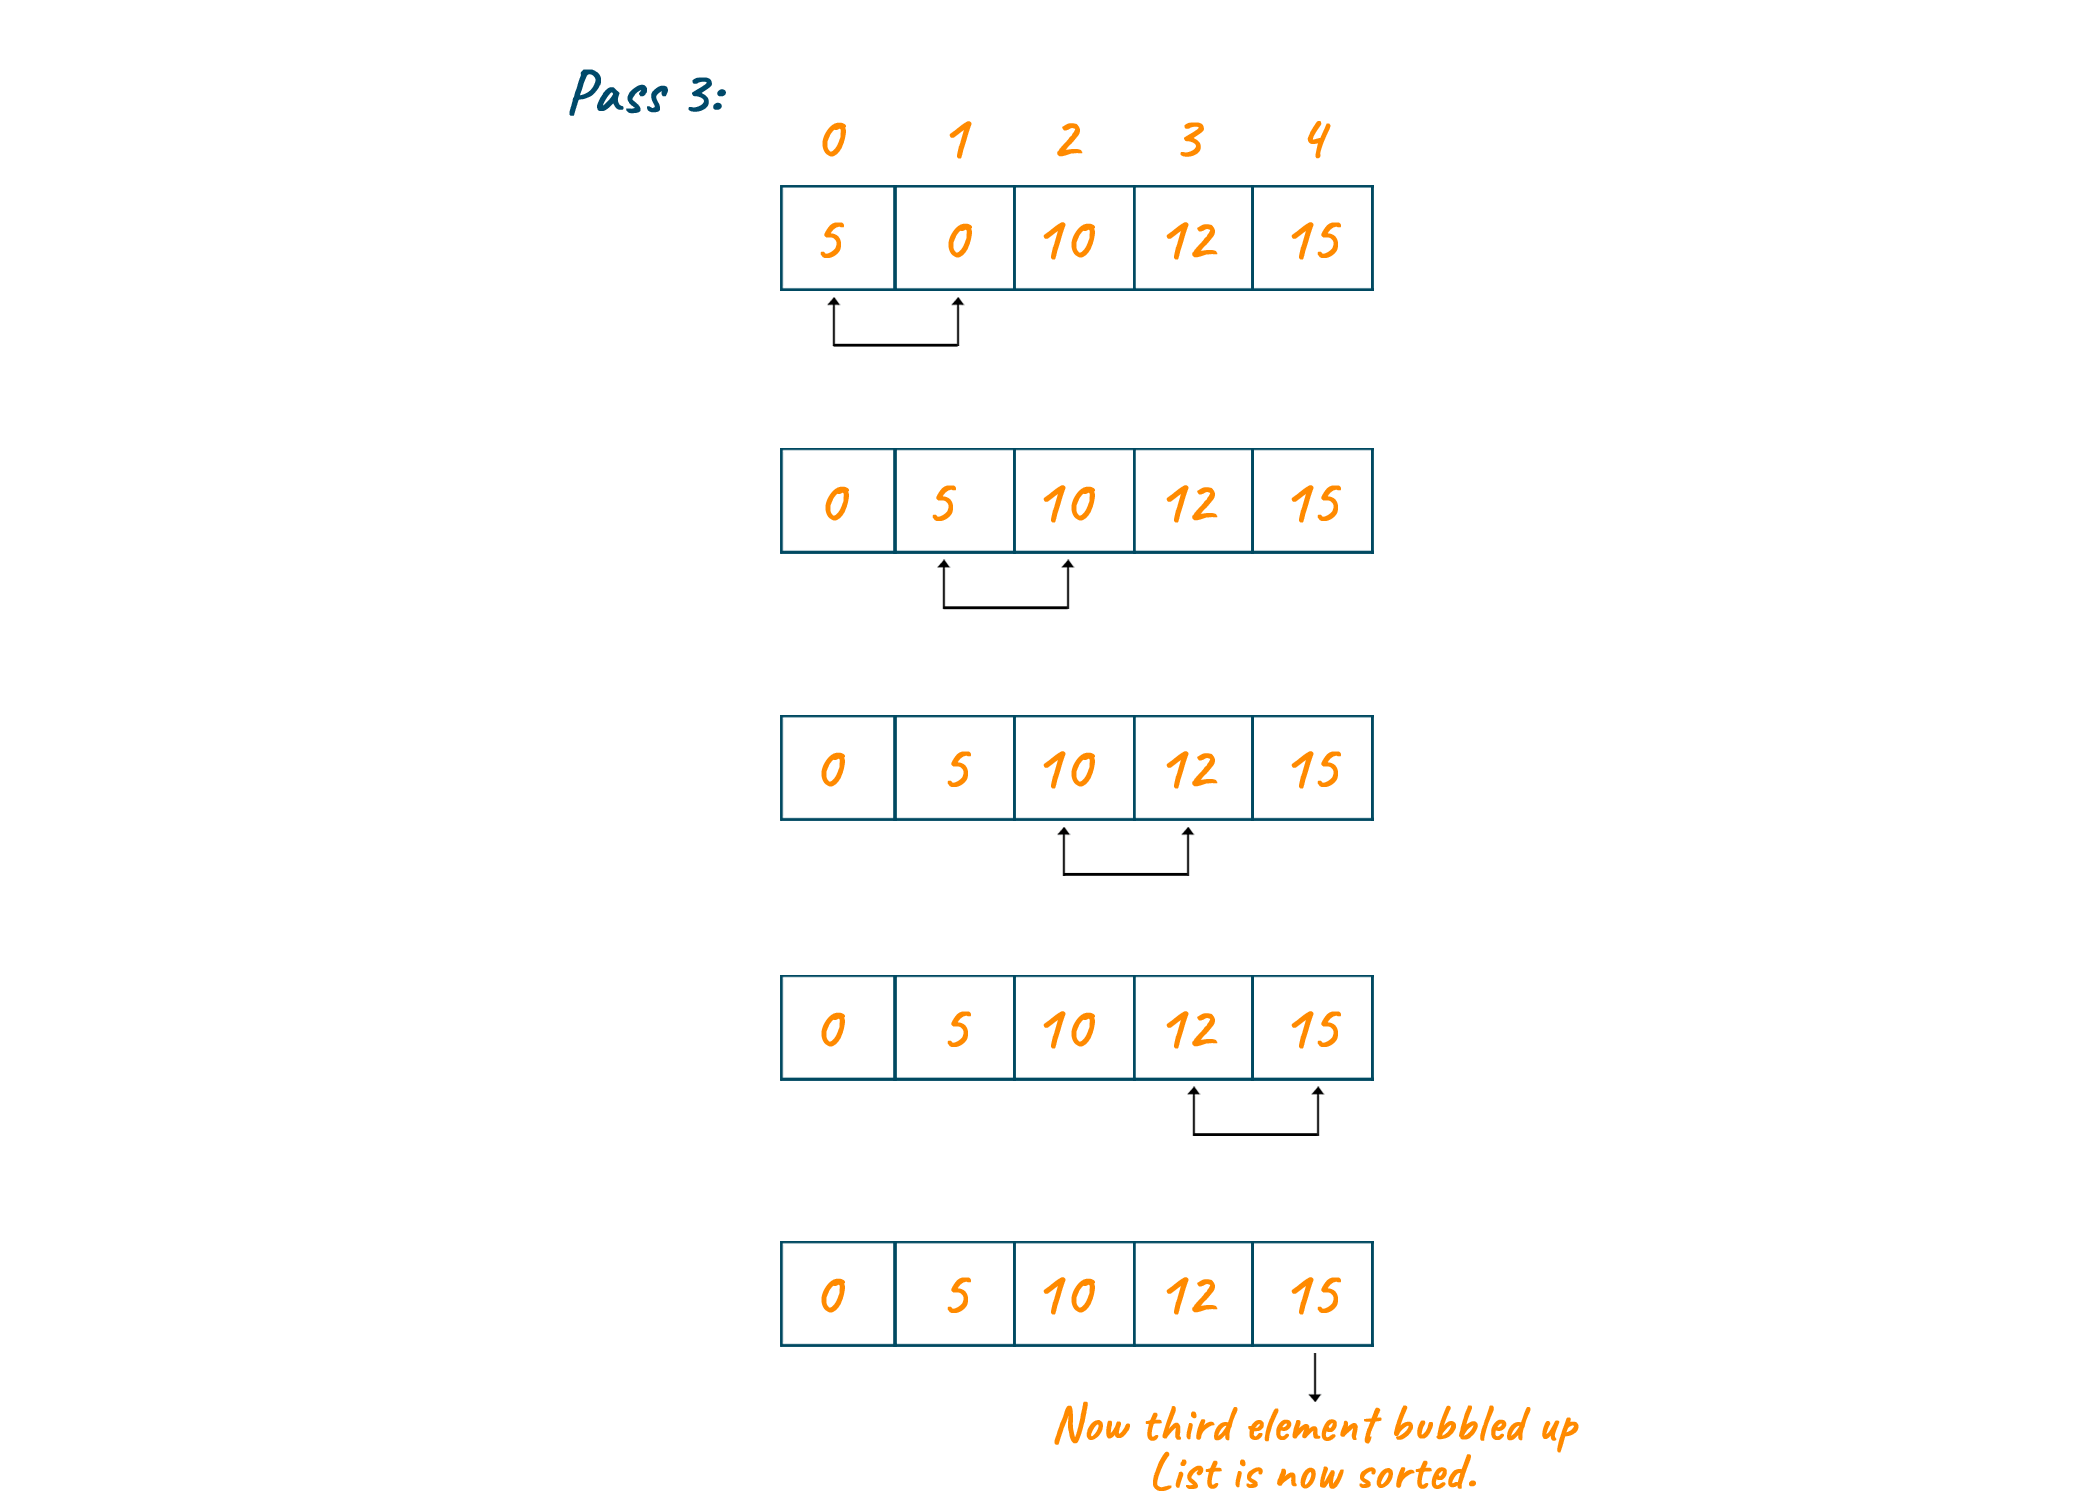 Final output of the bubble sort